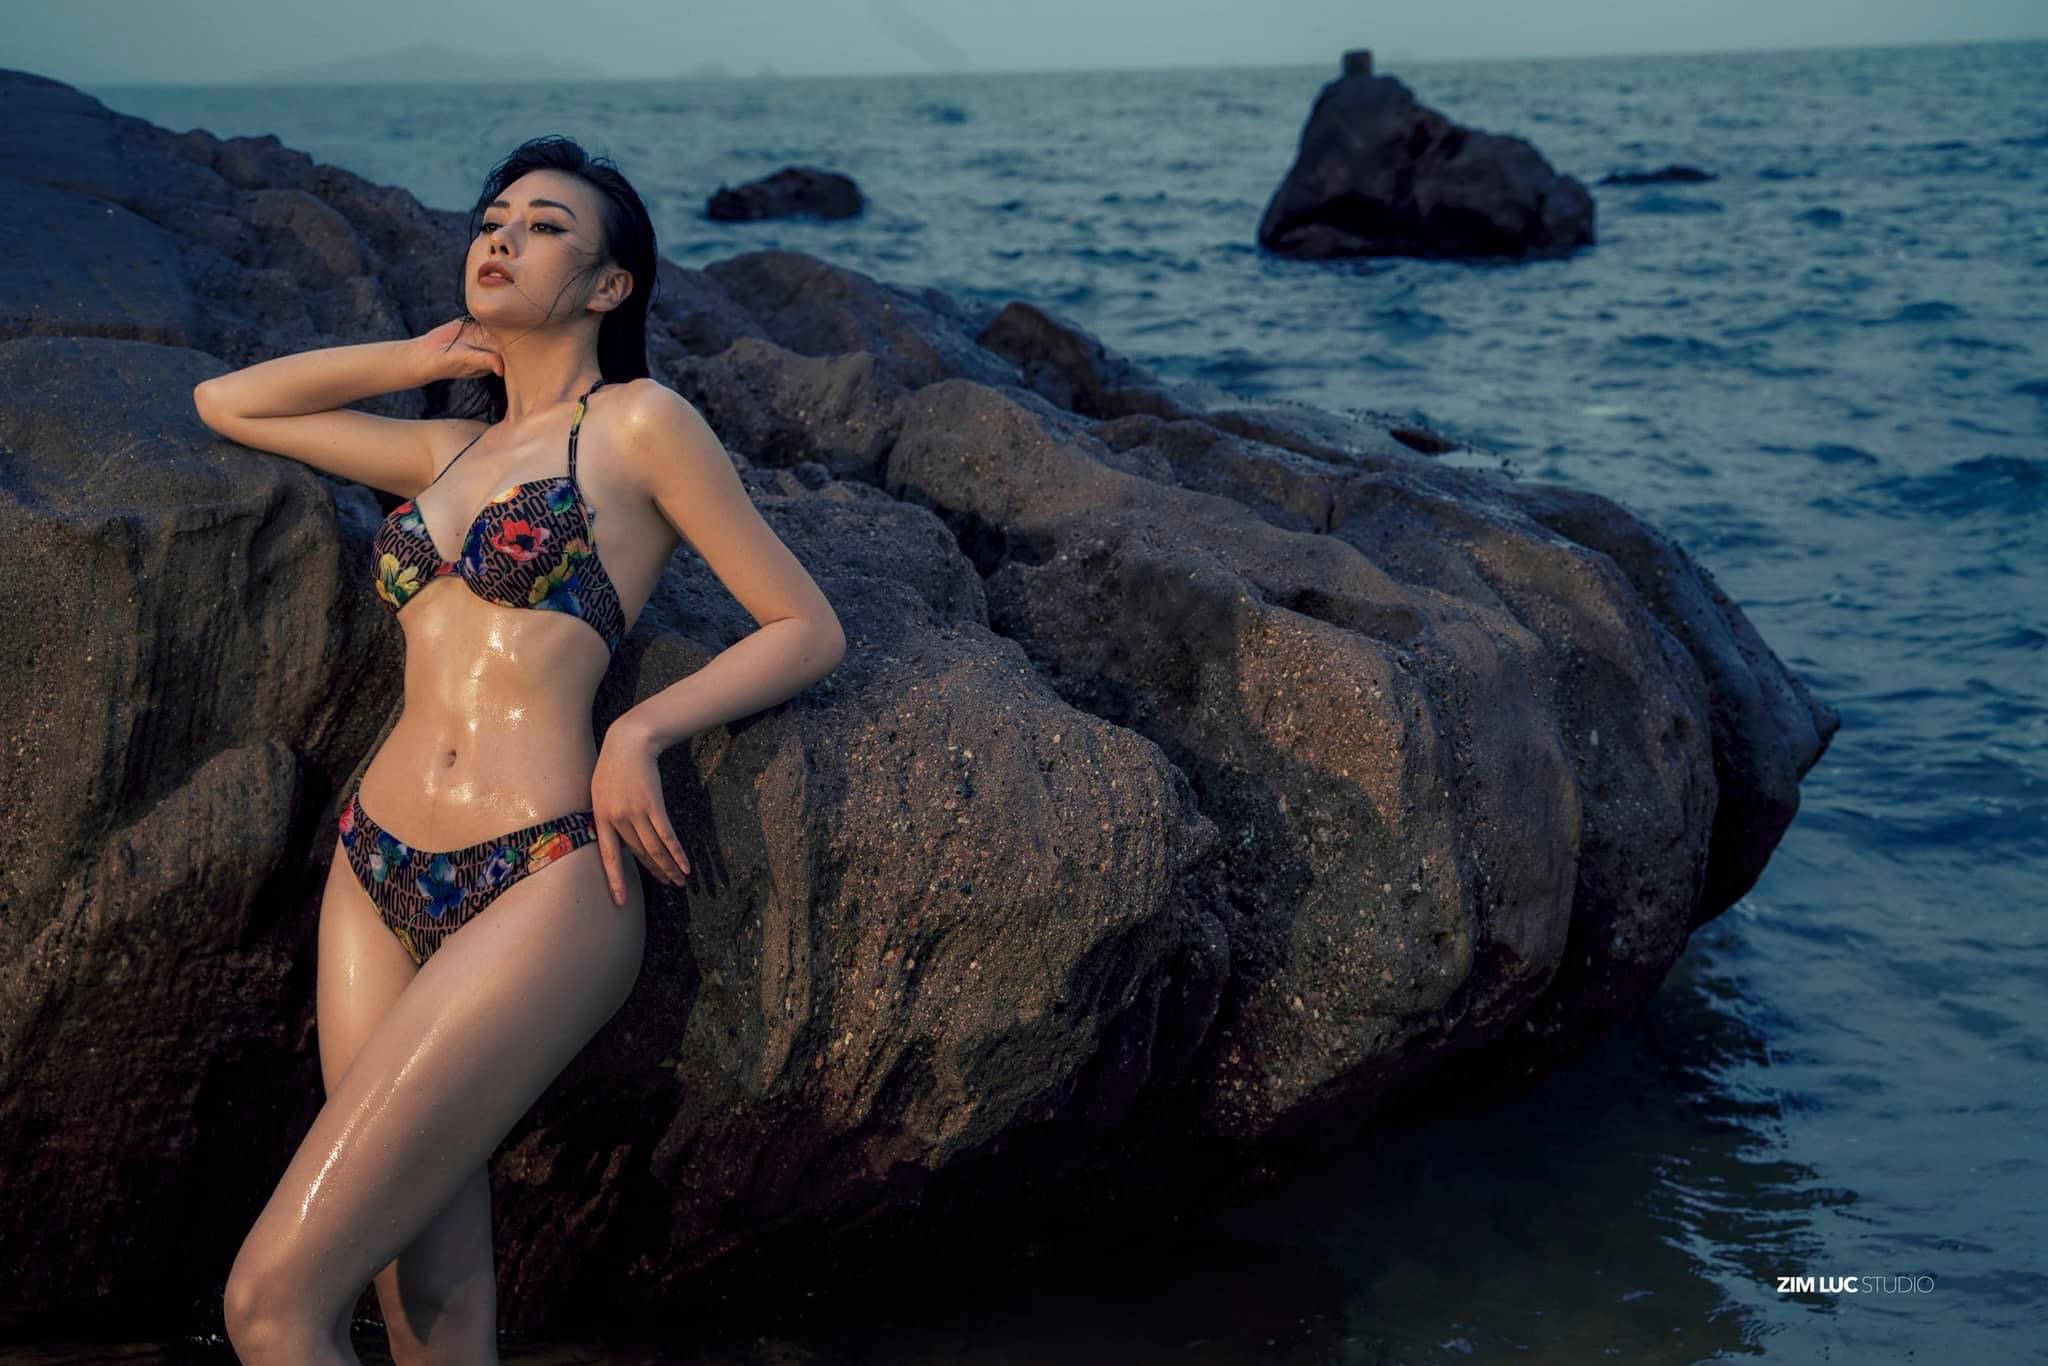 "Quynh Doll"  wearing a swimsuit is "addictive"  because the body is so beautiful - 1